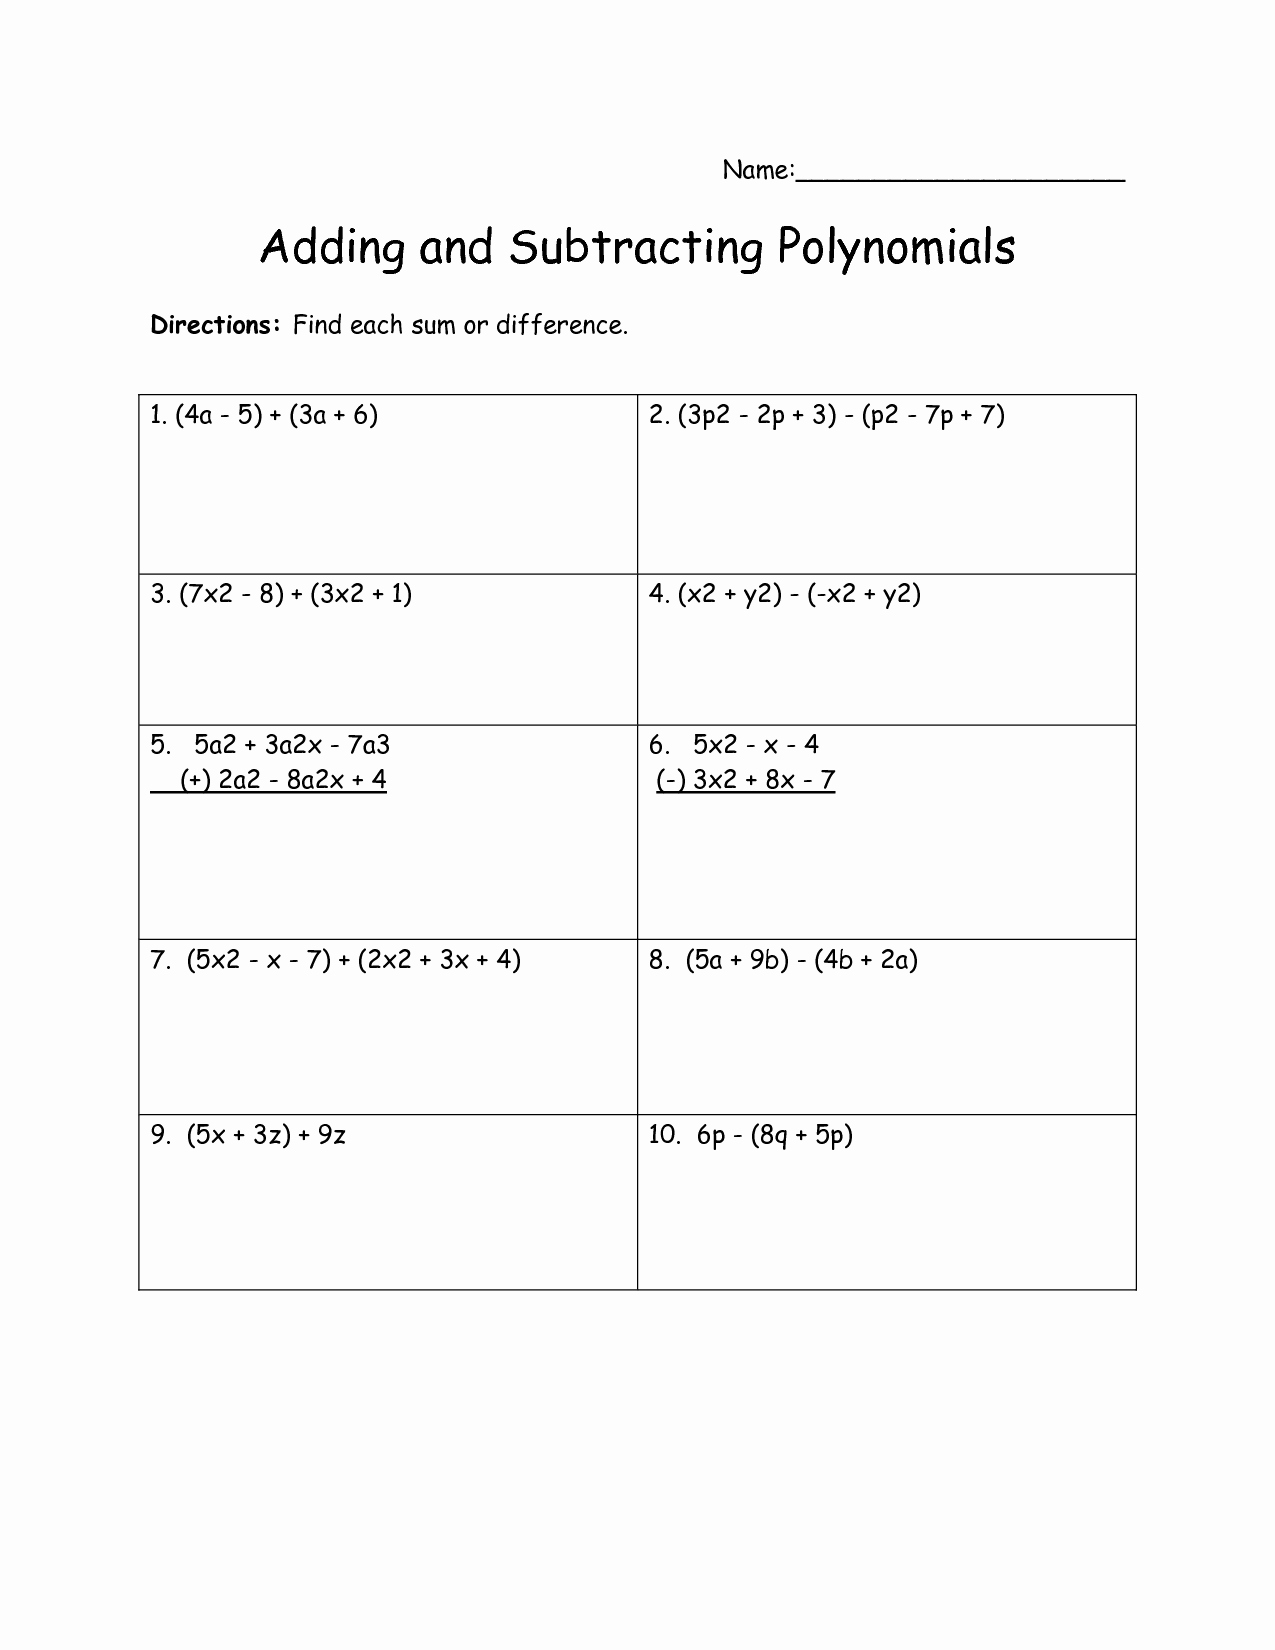 Adding and Subtracting Polynomials Worksheet Fresh Adding Polynomials Worksheet Fun